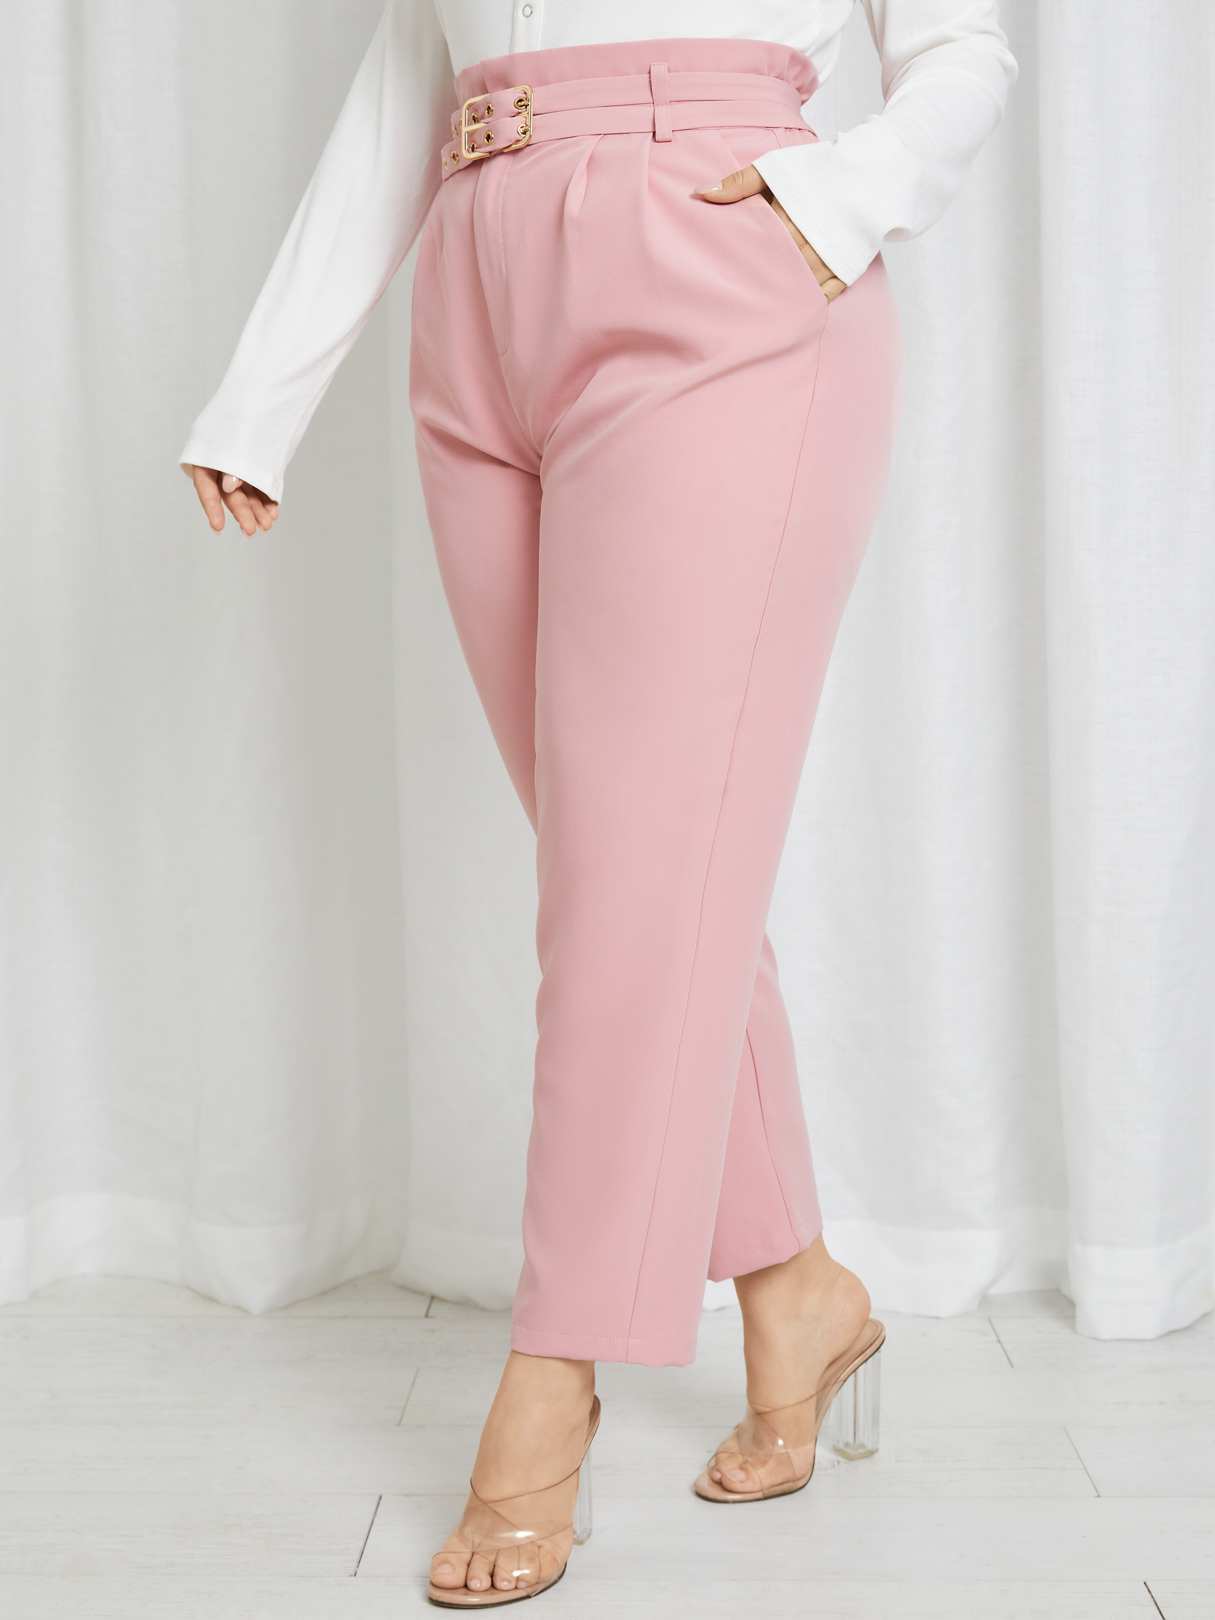 Belted With Pockets Casual Trousers